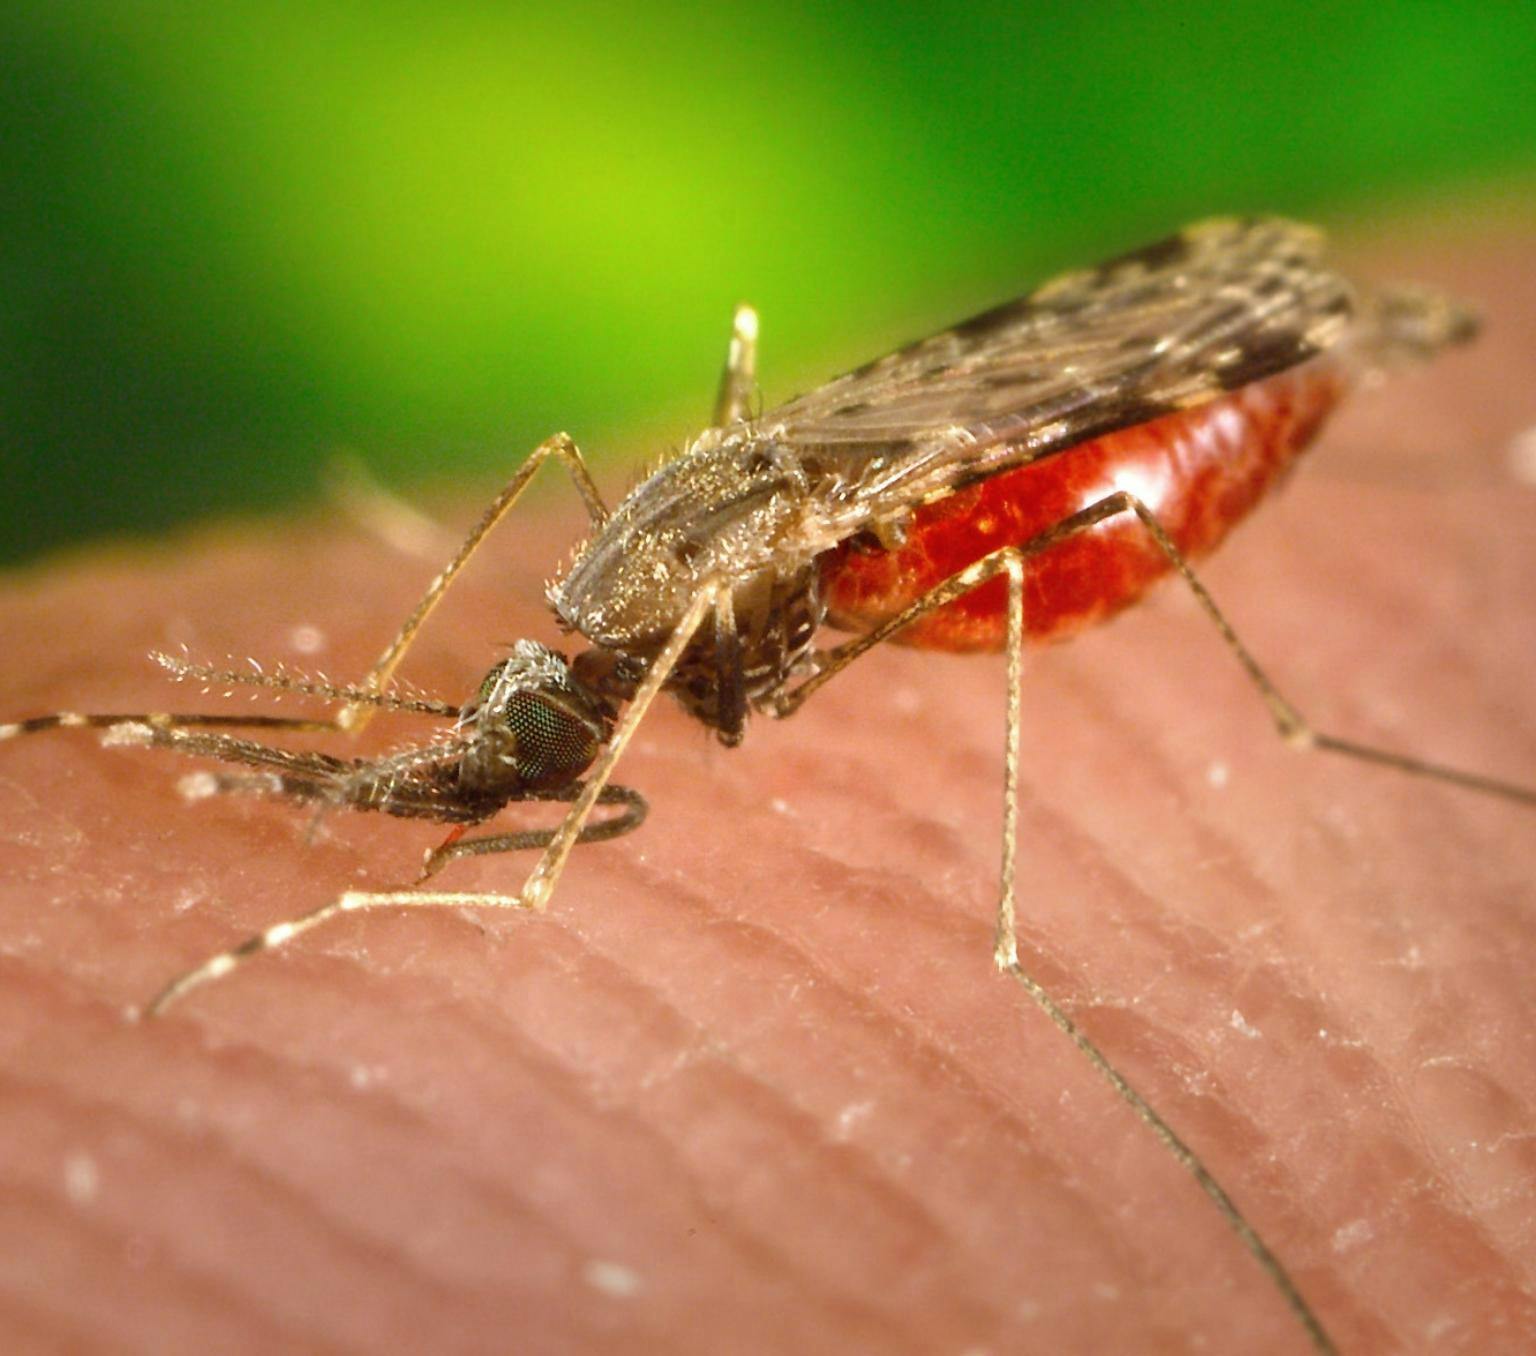 A feeding female Anopheles albimanus mosquito sucking blood from its human host. It has a bright-red abdomen that has become enlarged due to its blood meal contents. This mosquito is known for causing the parasitic disease malaria.